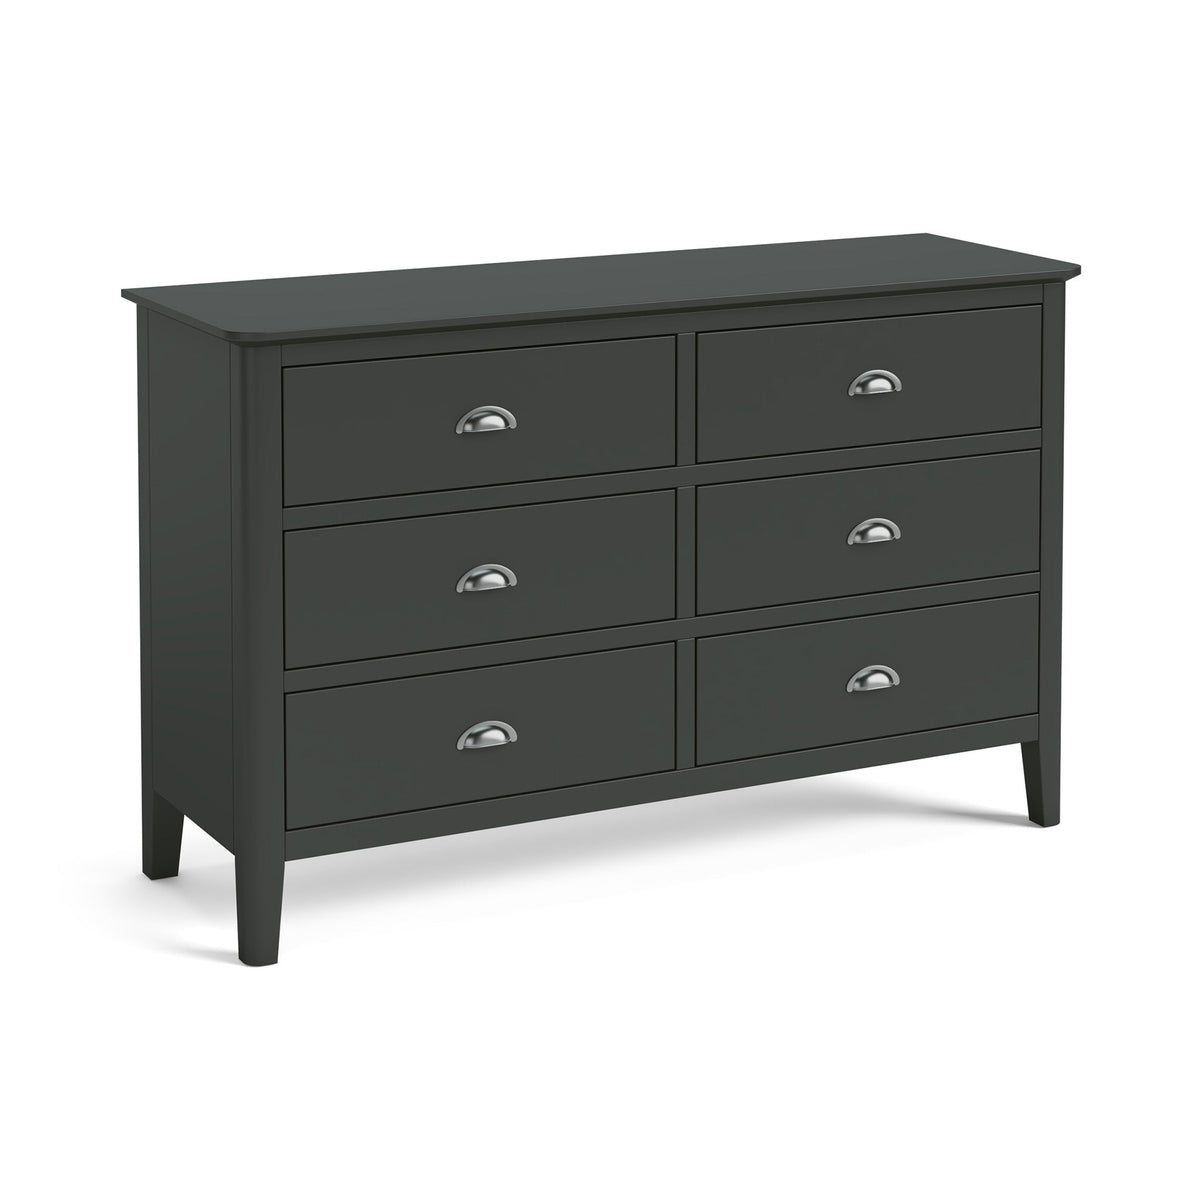 Dumbarton Charcoal Grey 3 over 3 Large Chest of Drawers from Roseland Furniture